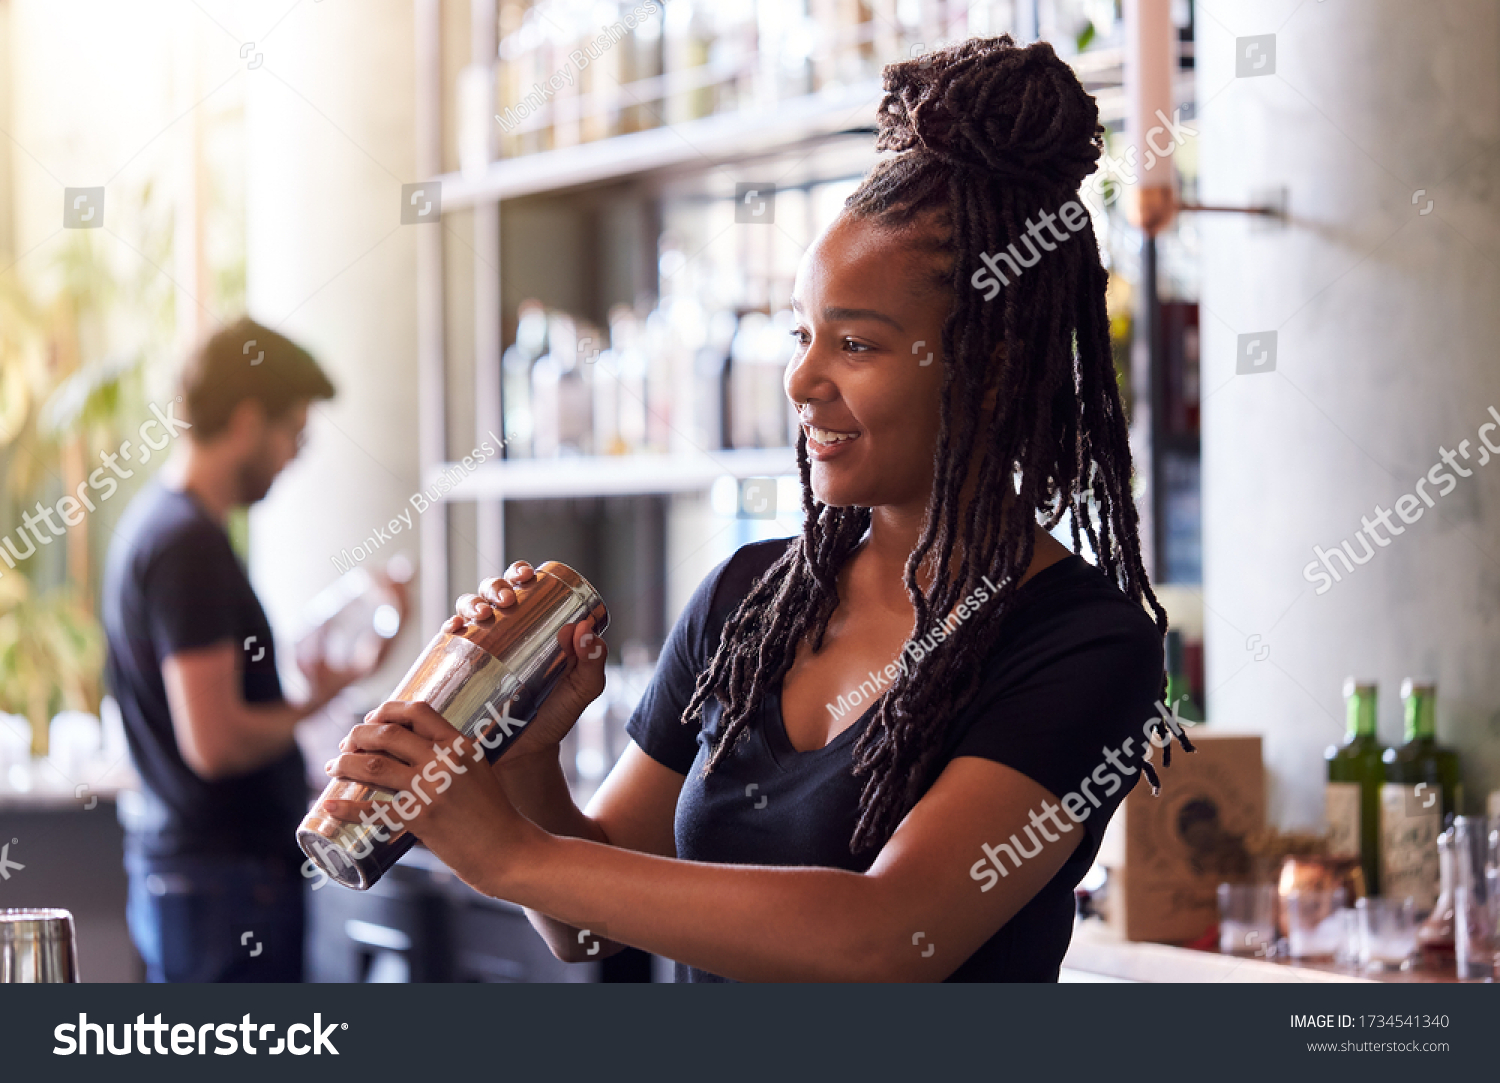 Female Bartender Mixing Cocktail In Shaker Behind Bar #1734541340